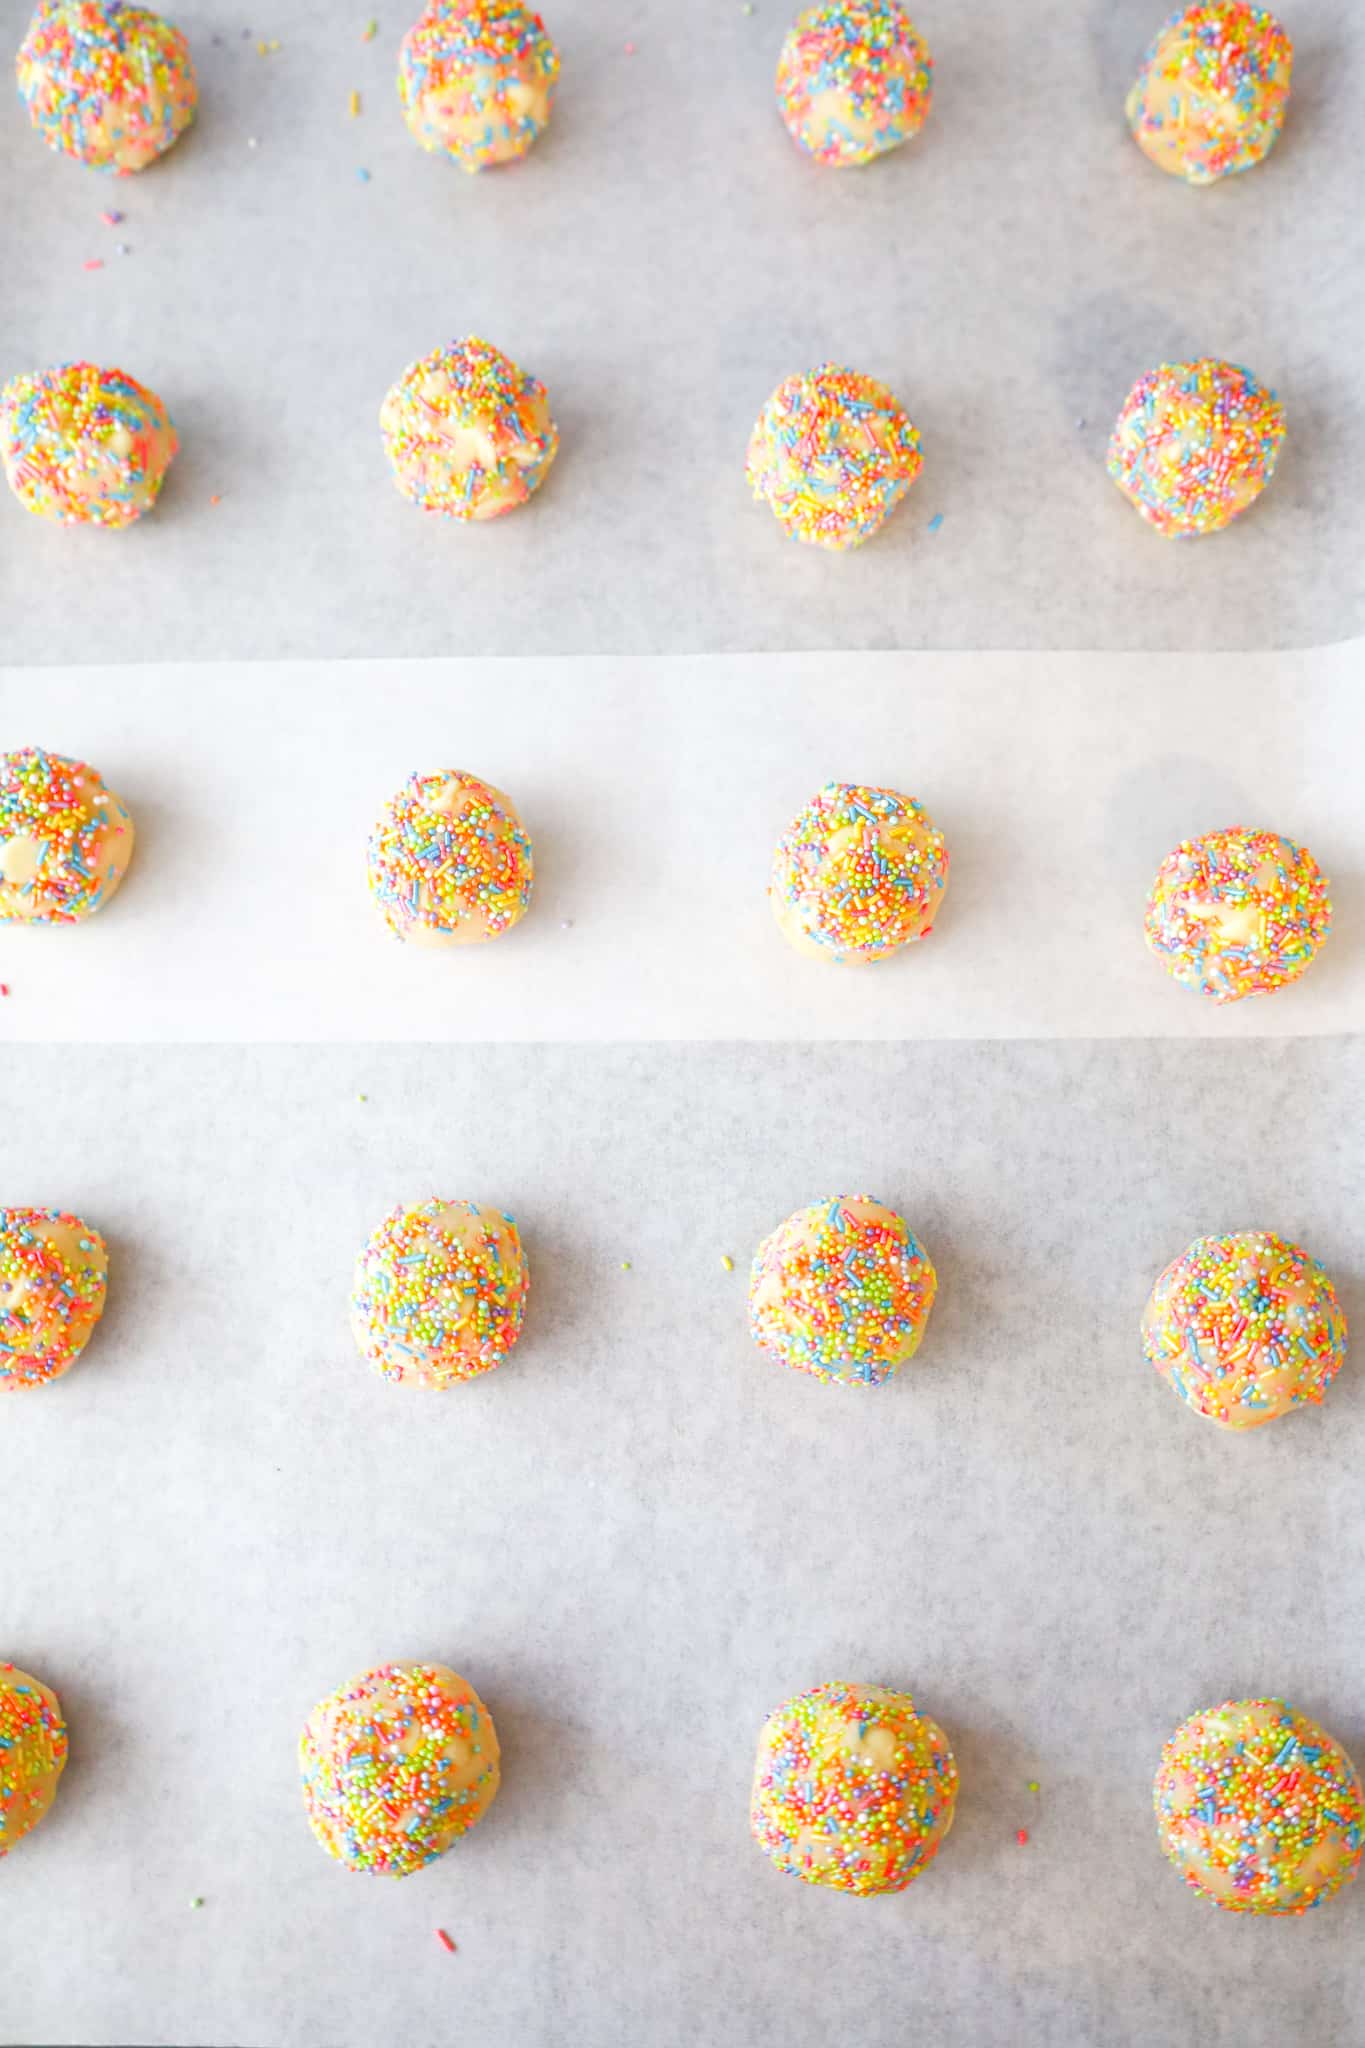 cookie dough balls coated in rainbow sprinkles on a parchment lined baking sheet